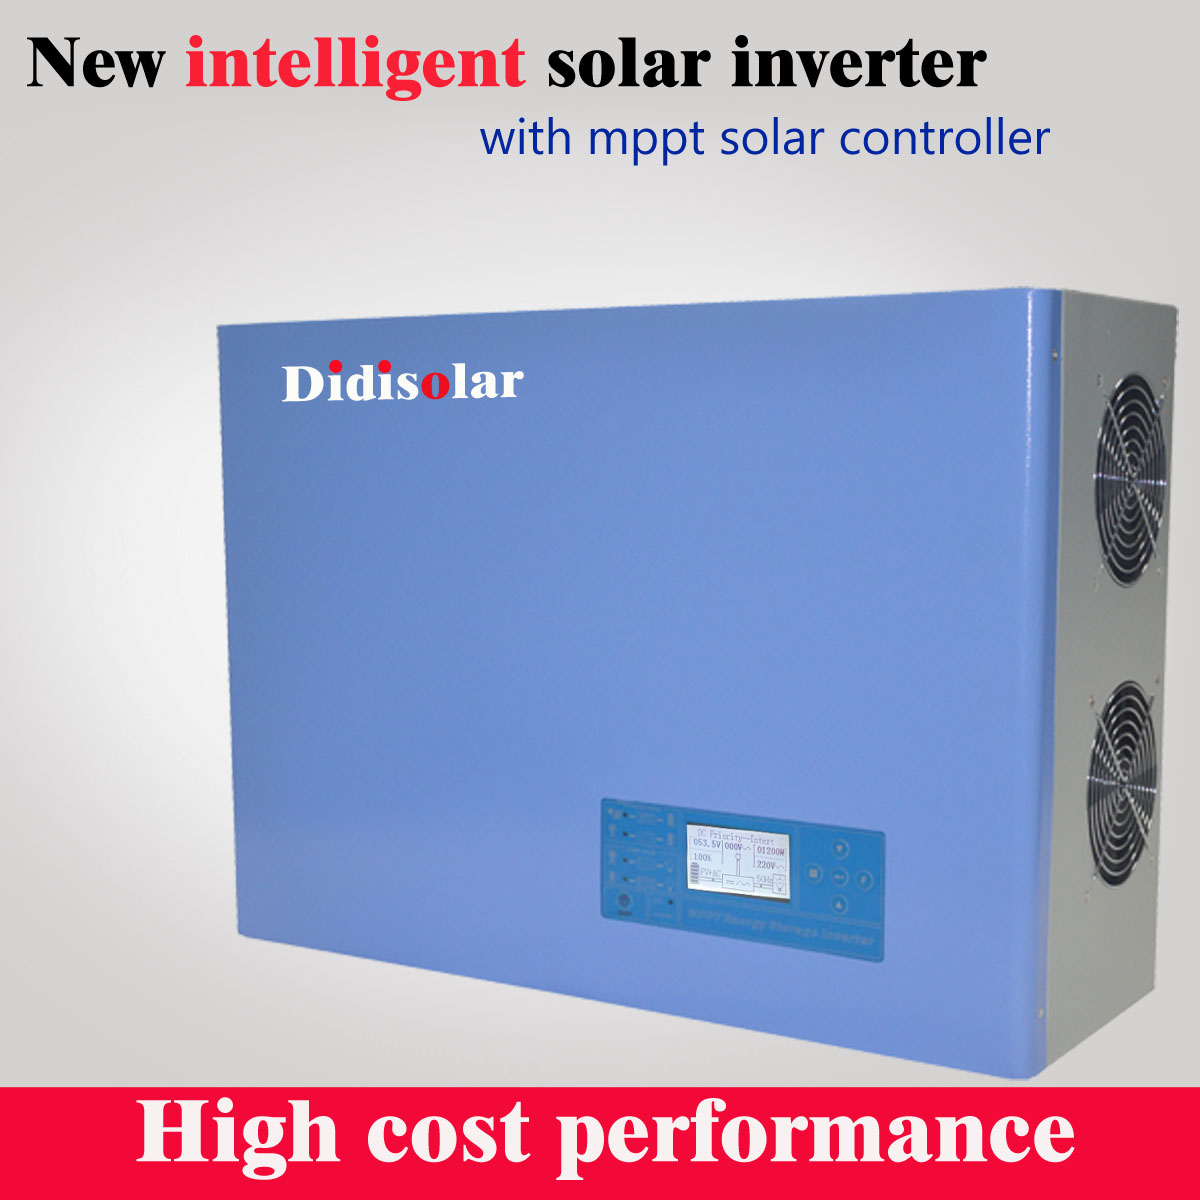 How does the Didisolar solar inverter query the operation information?